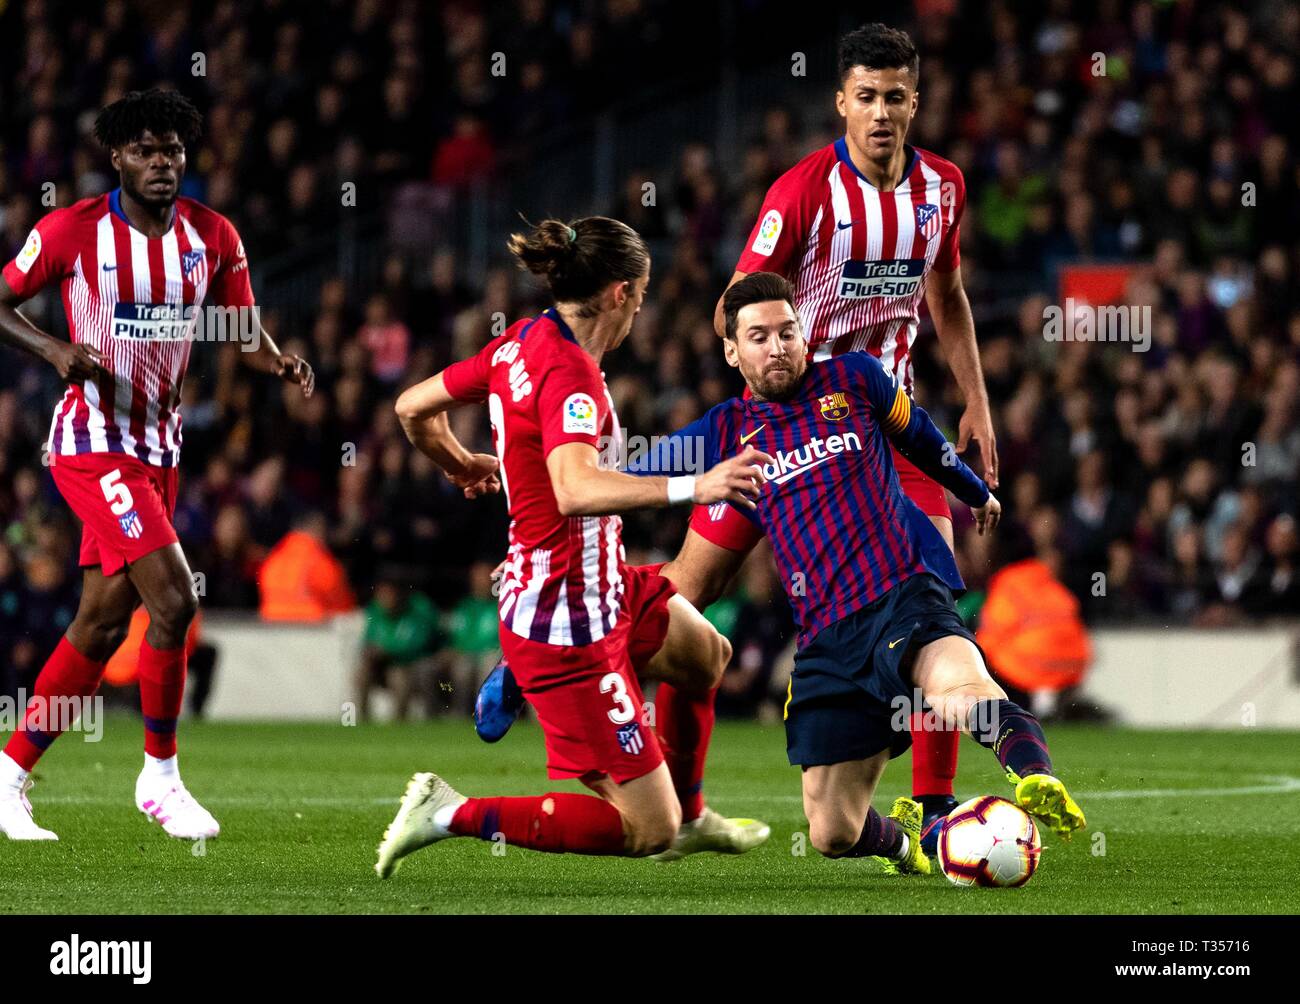 Barcelona, Spain. 6th Apr, 2019. FC Barcelona's Lionel Messi (2nd R) vies with Atletico de Madrid's Filipe Luis (2nd L) during a Spanish La Liga match between FC Barcelona and Atletico de Madrid in Barcelona, Spain, on April 6, 2019. FC Barcelona won 2-0. Credit: Joan Gosa/Xinhua/Alamy Live News Stock Photo